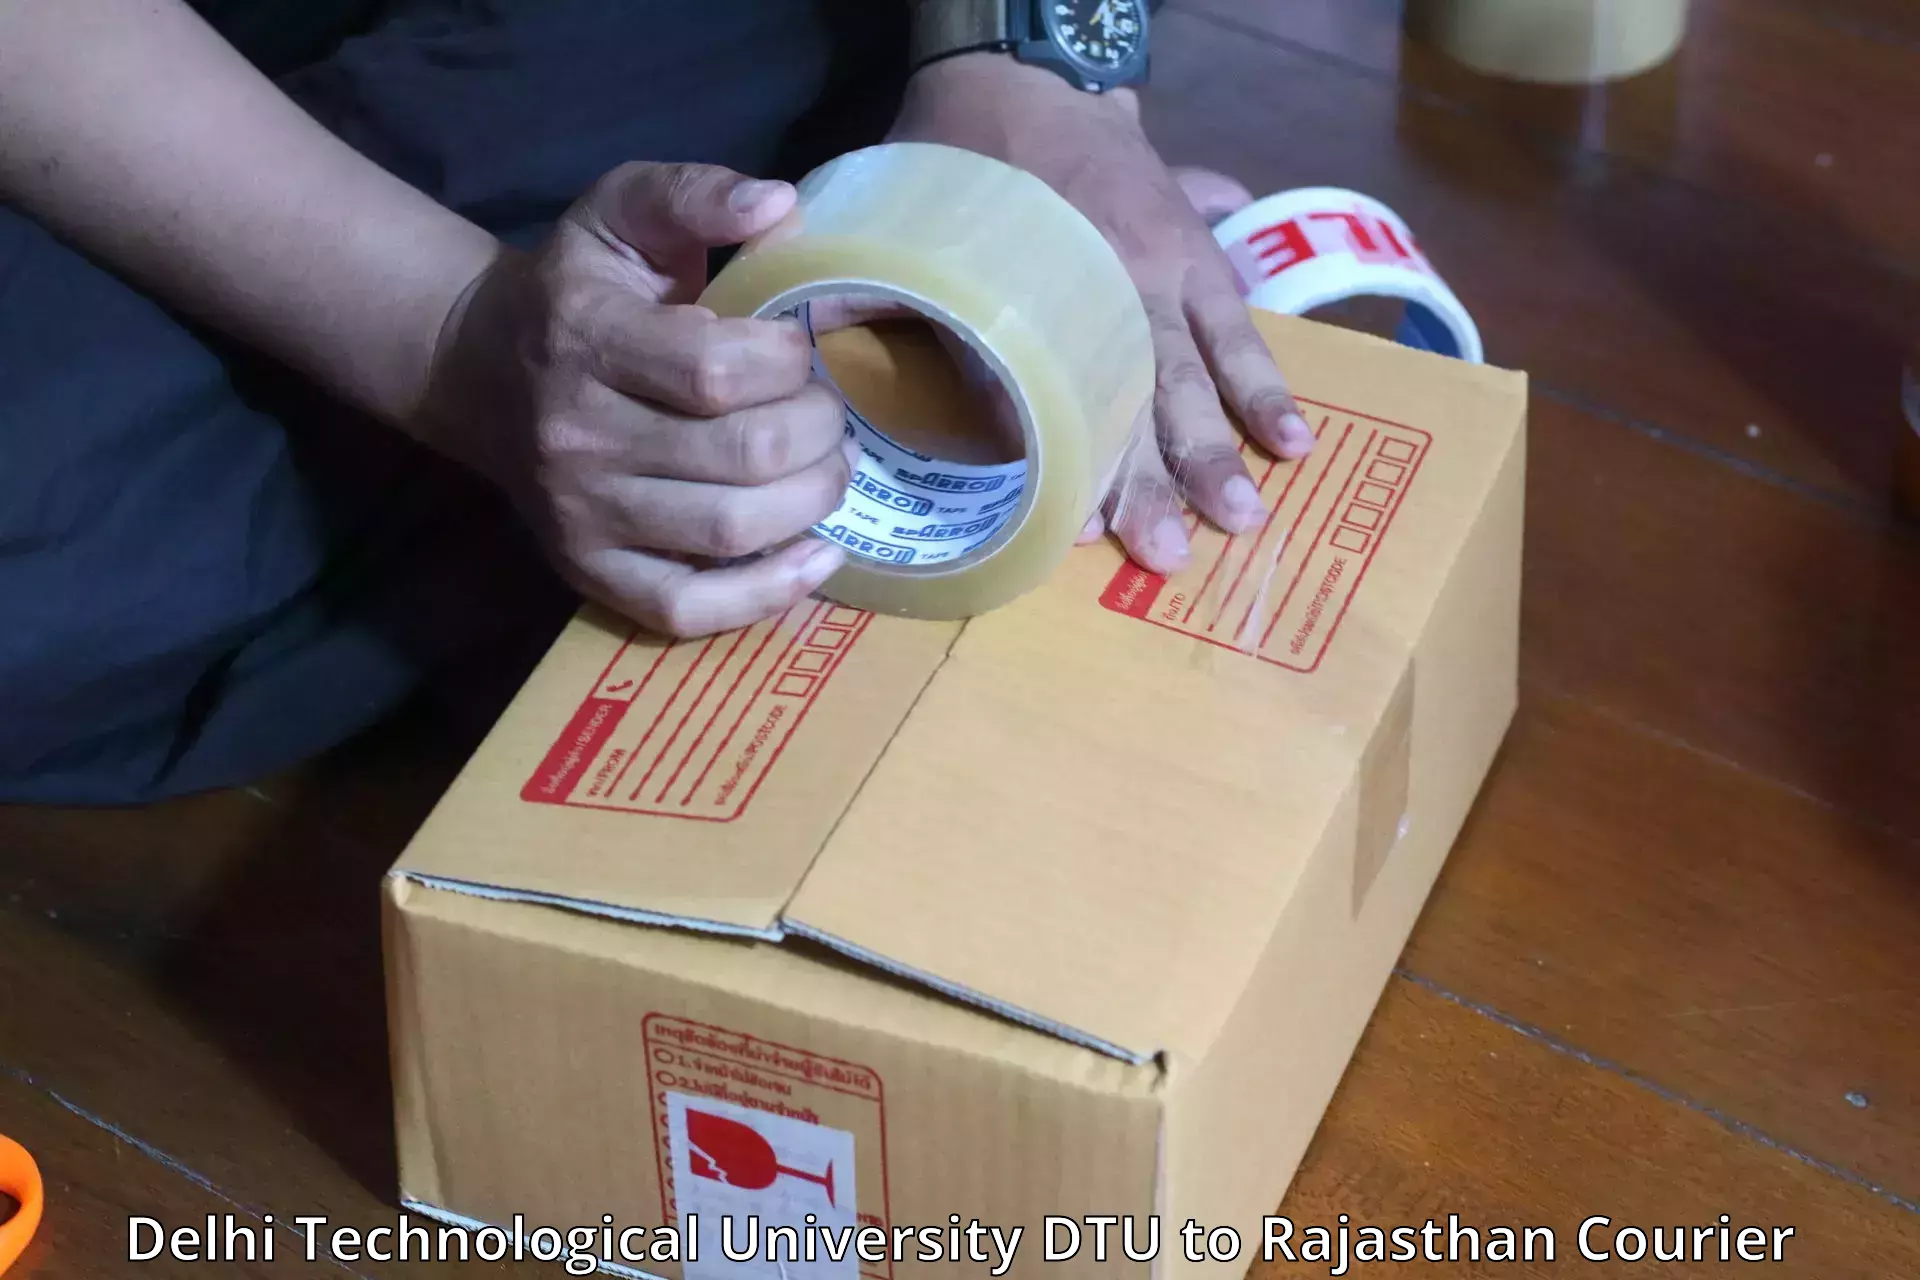 Luggage transport consulting Delhi Technological University DTU to Rajasthan